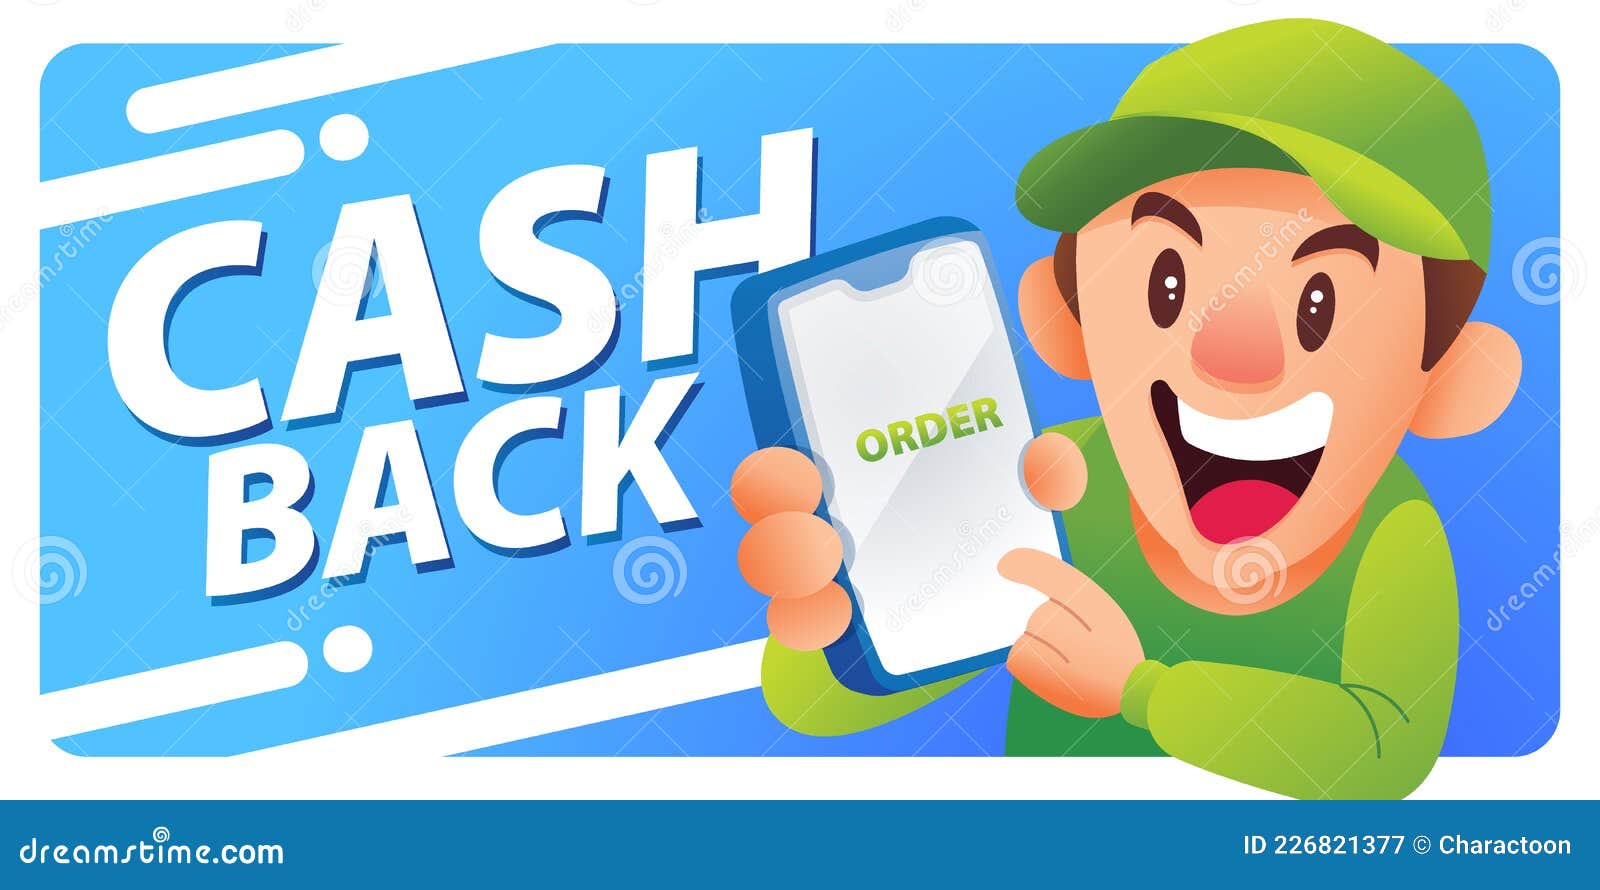 Cartoon Delivery Man Wearing Uniform and Cap is Holding a Smartphone To Show  Online Order App Stock Vector - Illustration of medicine, package: 226821377